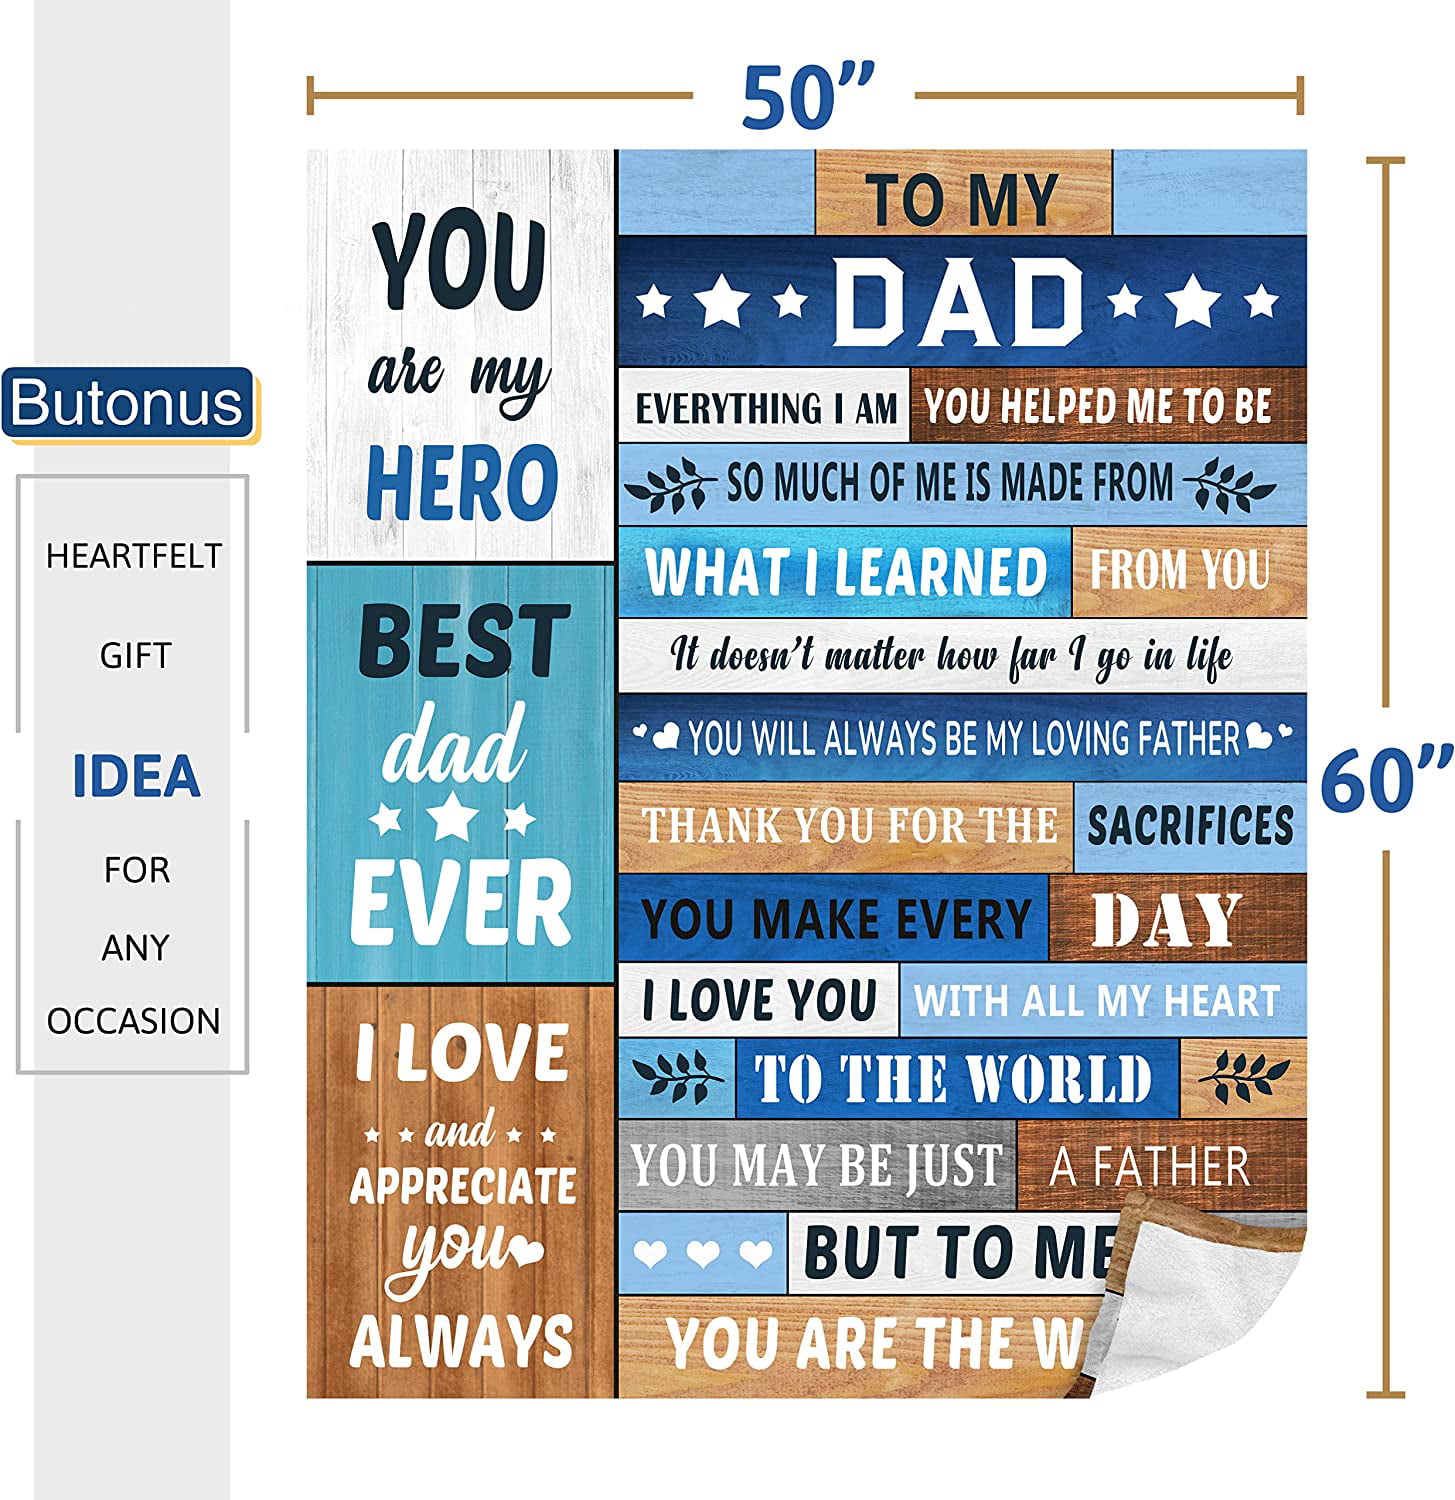 44 Father's Day Gift Ideas for the Dad Who “Doesn't Want Anything”